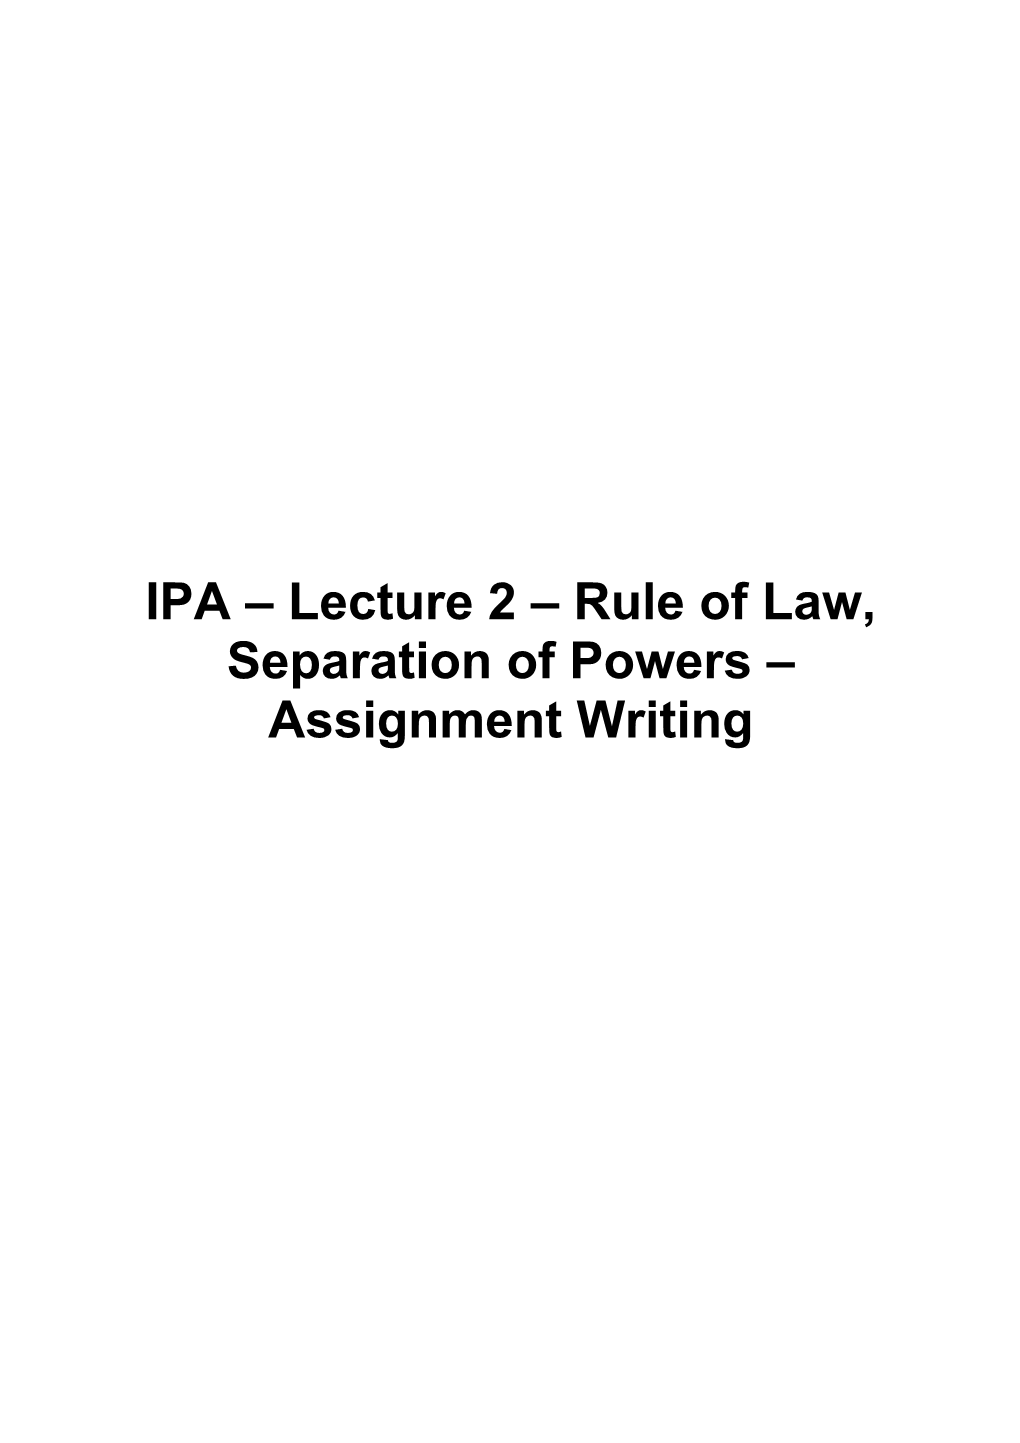 IPA Lecture 2 Rule of Law, Separation of Powers Assignment Writing